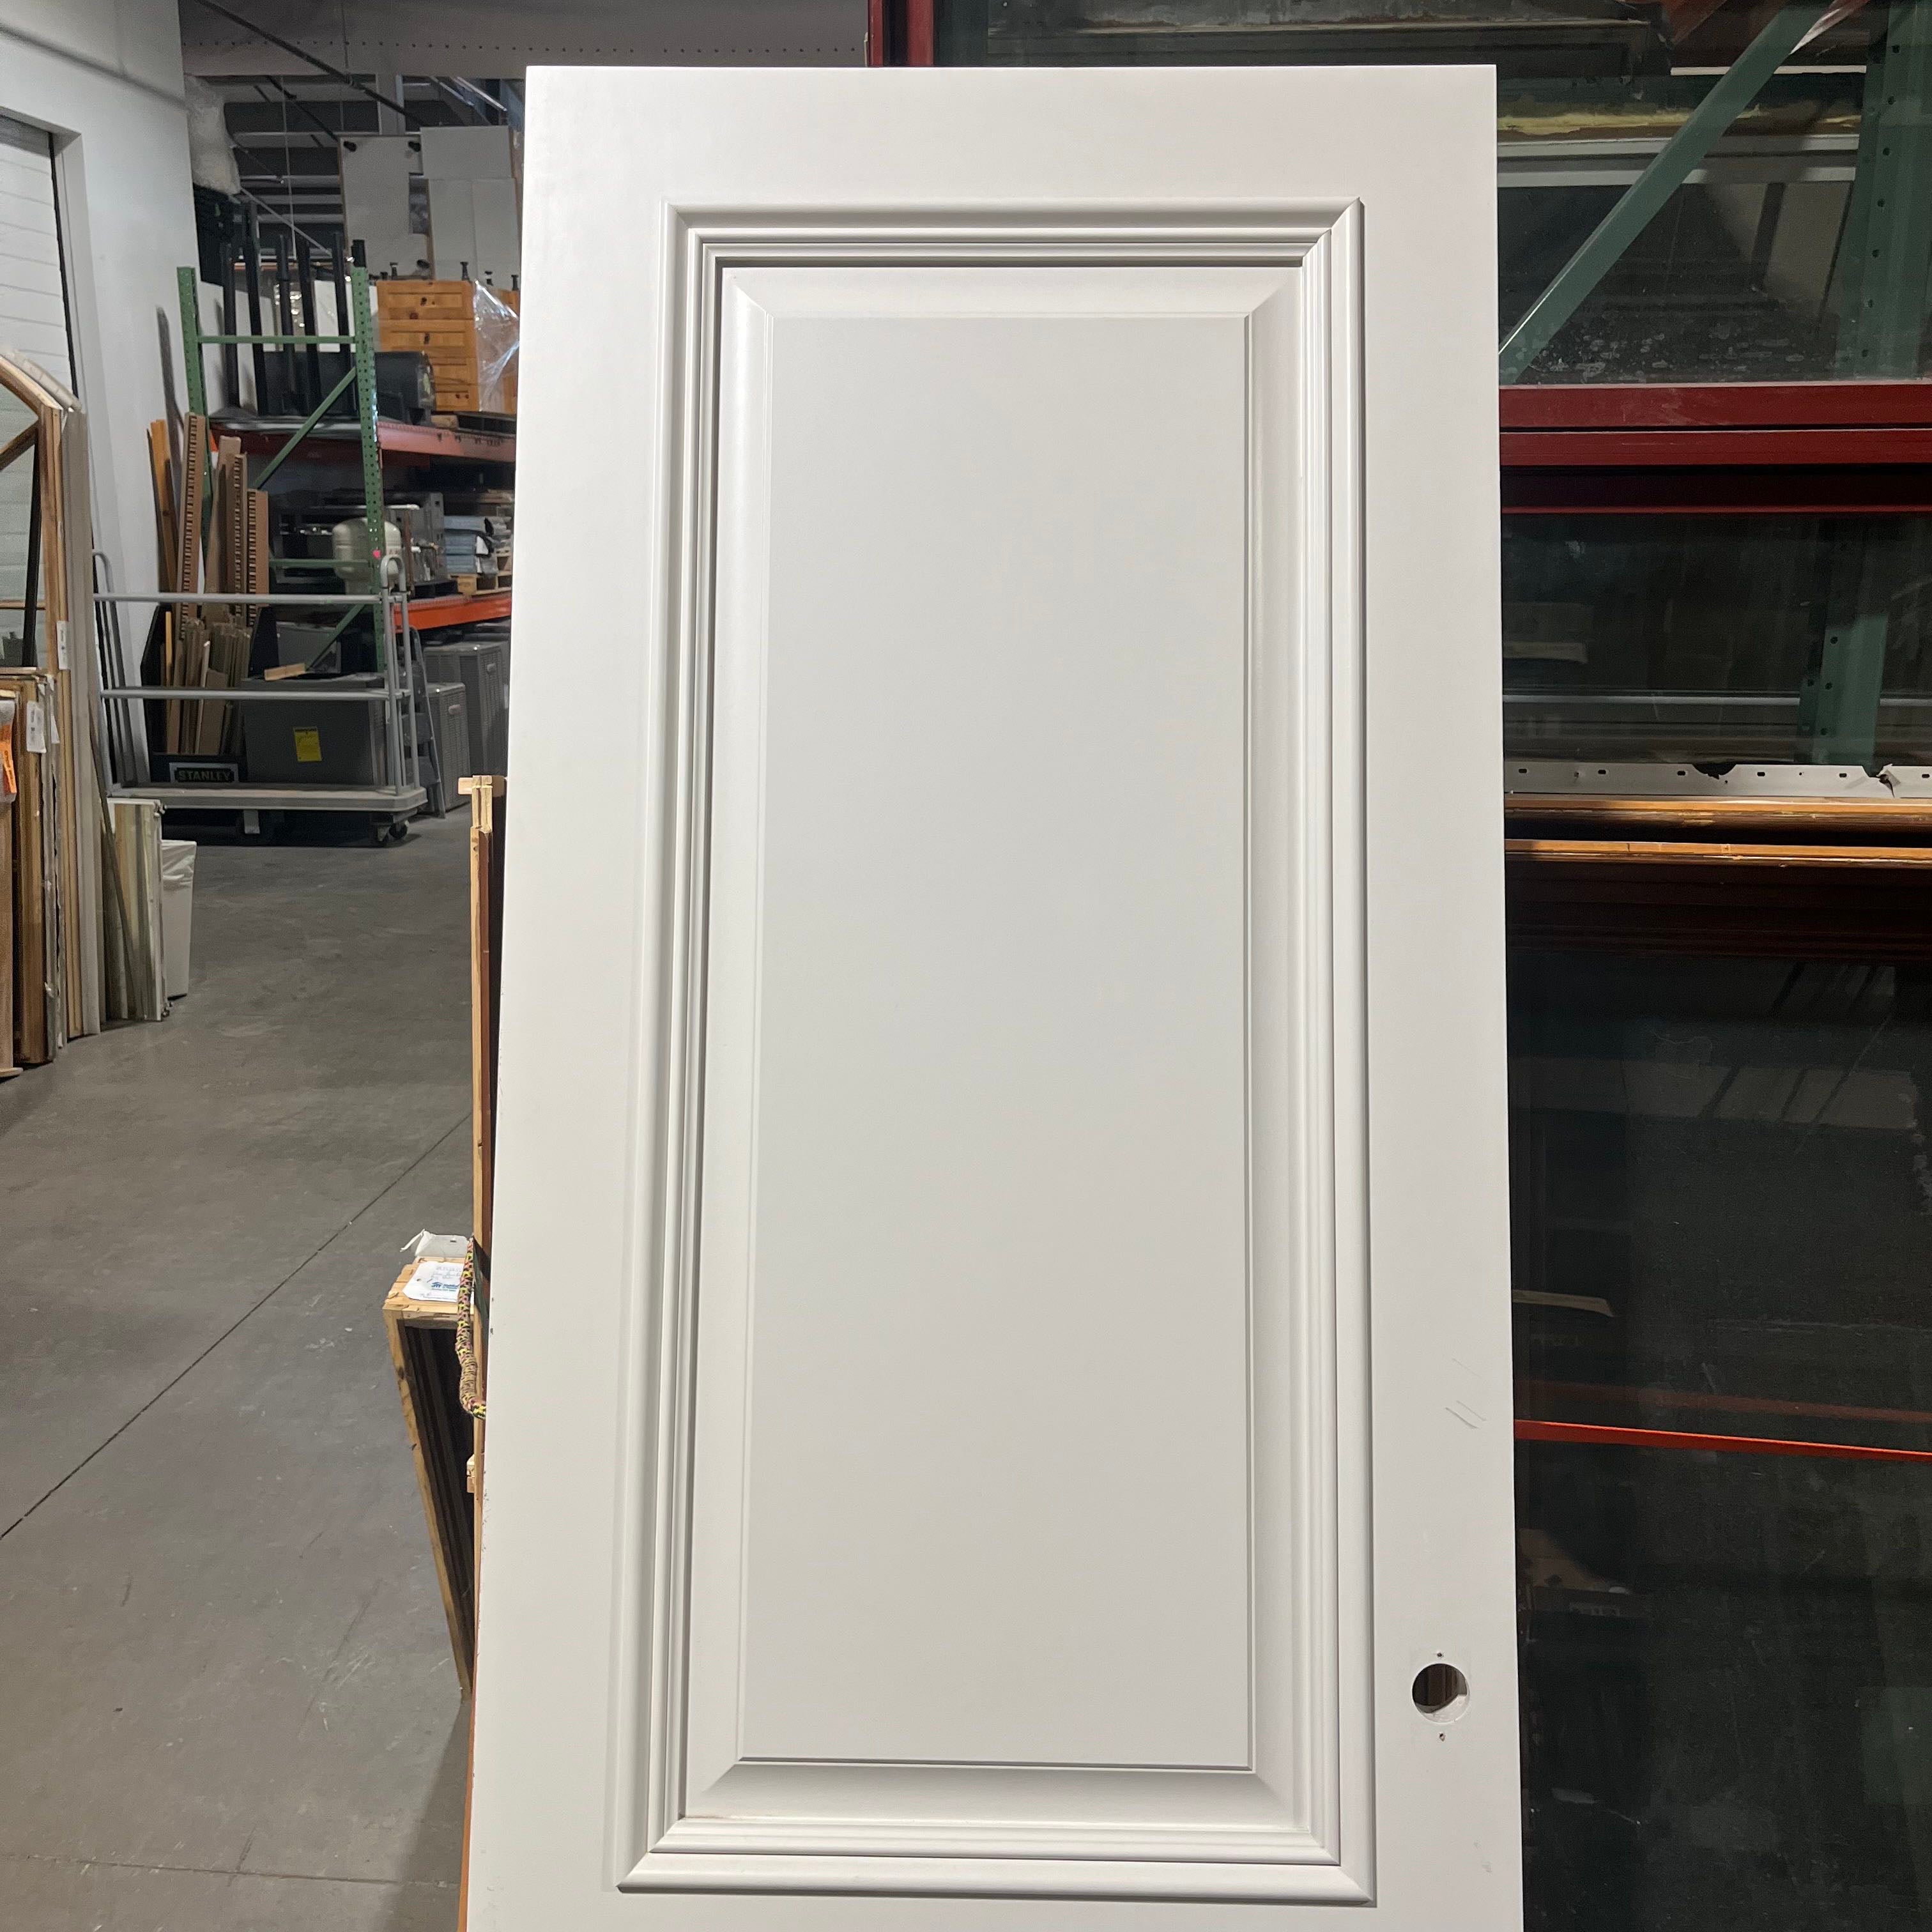 33.75"x 87.5"x 1.75" 2 Panel Painted White Solid Wood/Timber Straned Interior Door